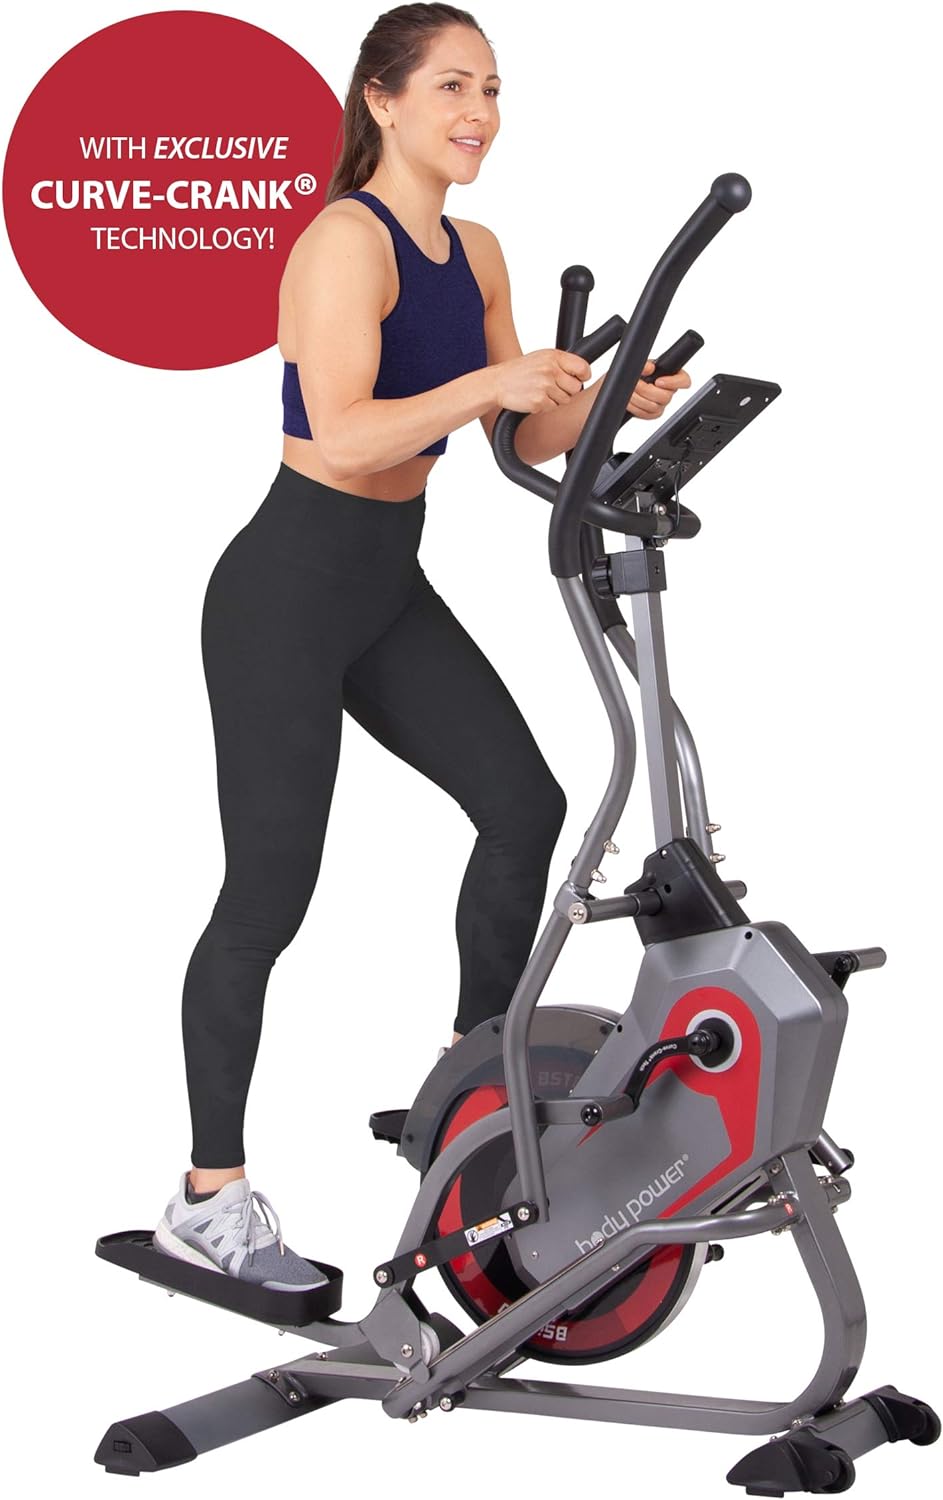 I bought the Body Power 2-in-1 step trainer about a year and a half ago because I didn't want to go back to the gym after the pandemic. It' a great machine, provides a nice full-body workout. A few months ago, the inner belt() started shedding bits, like it was coming apart. I contacted Customer Service; they were courteous and timely in their responses. After sending them a video of what the machine was doing, they quickly sent out a replacement - no charge! Great experience!